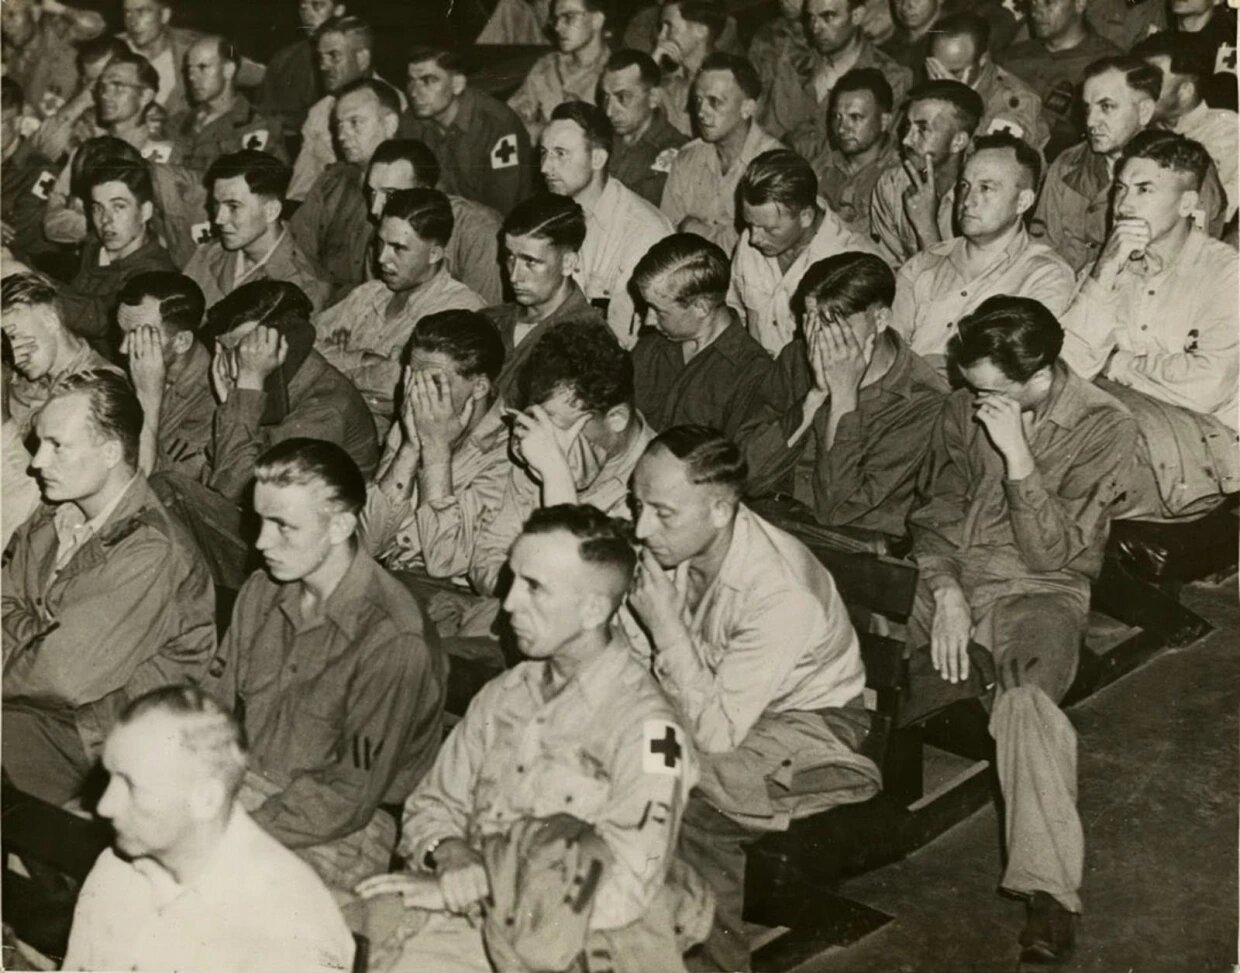 german-soldiers-react-to-footage-of-concentration-camps-1945.jpg